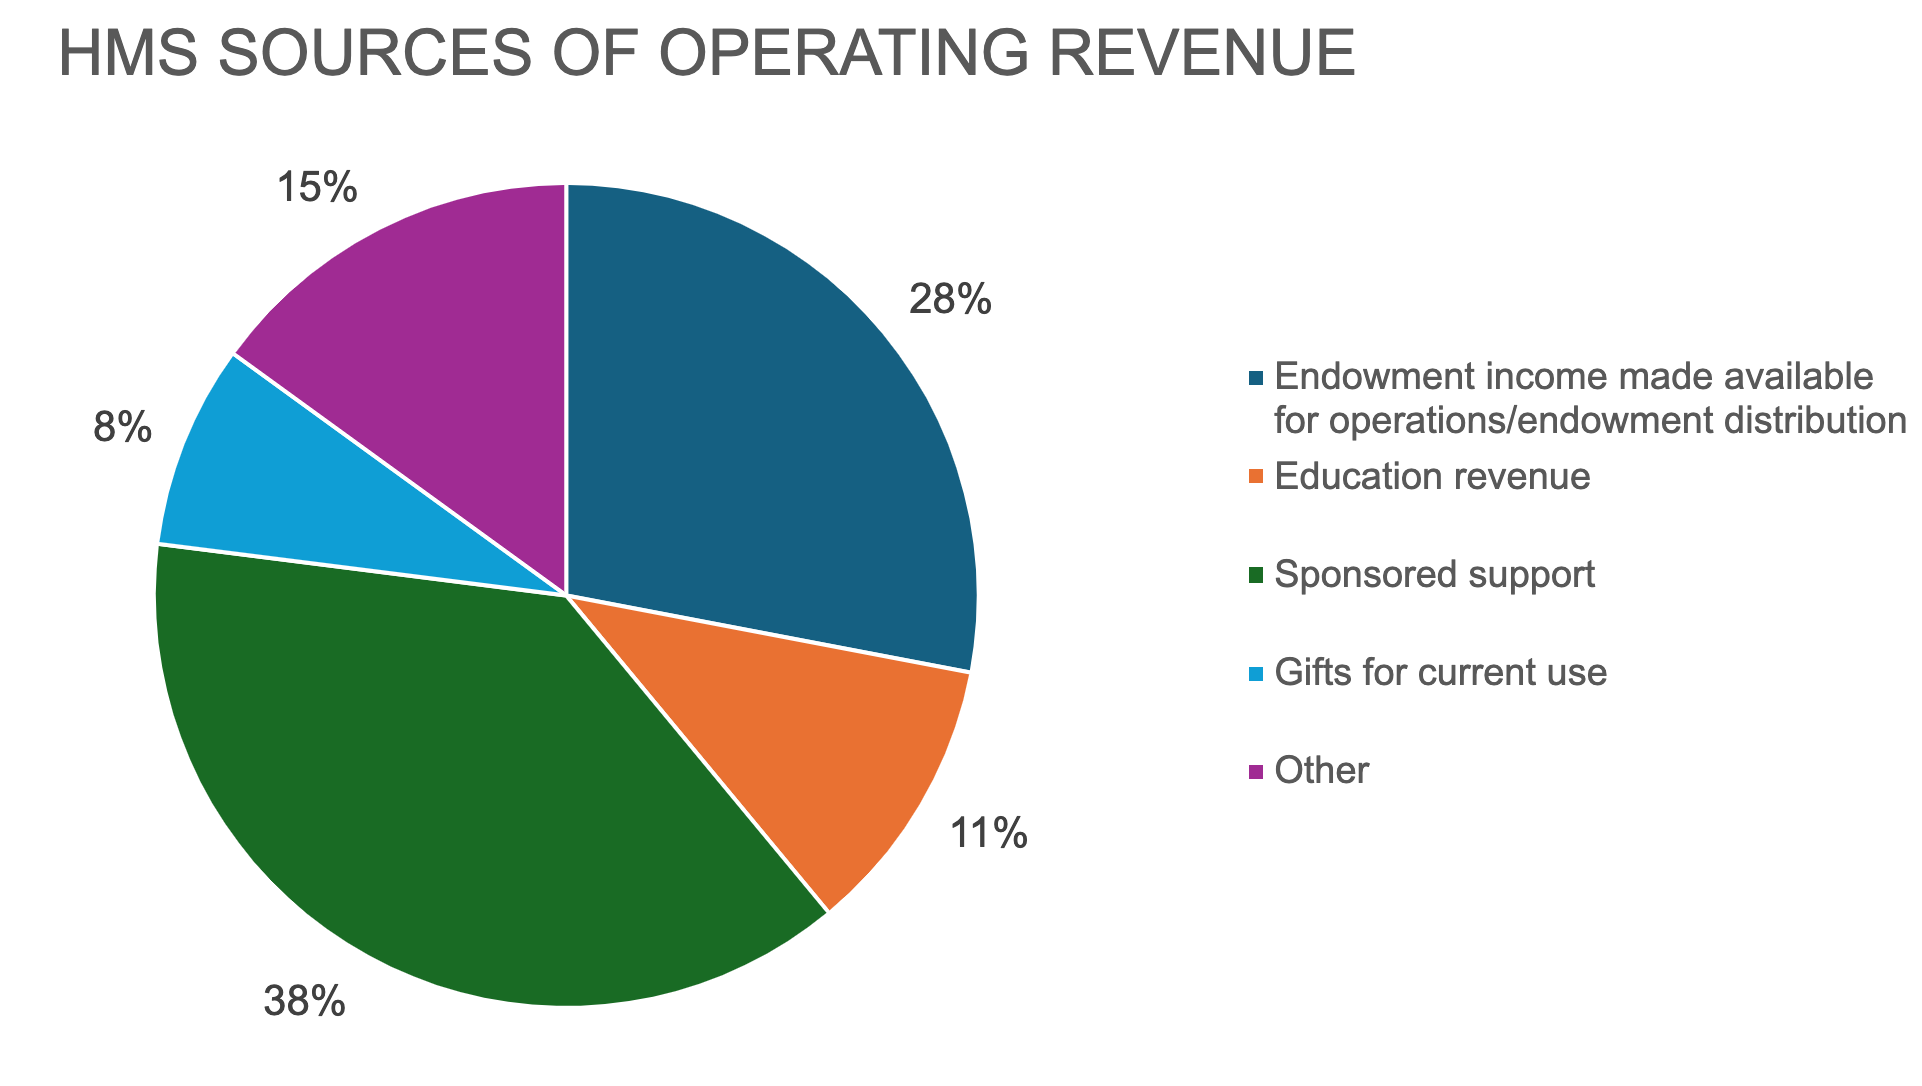 pie chart labeled "HMS Sources of Operating Revenue" shows slices of 28% endowment income, 11% education revenue, 38% sponsored support, 8% gifts for current use, and 15% other.